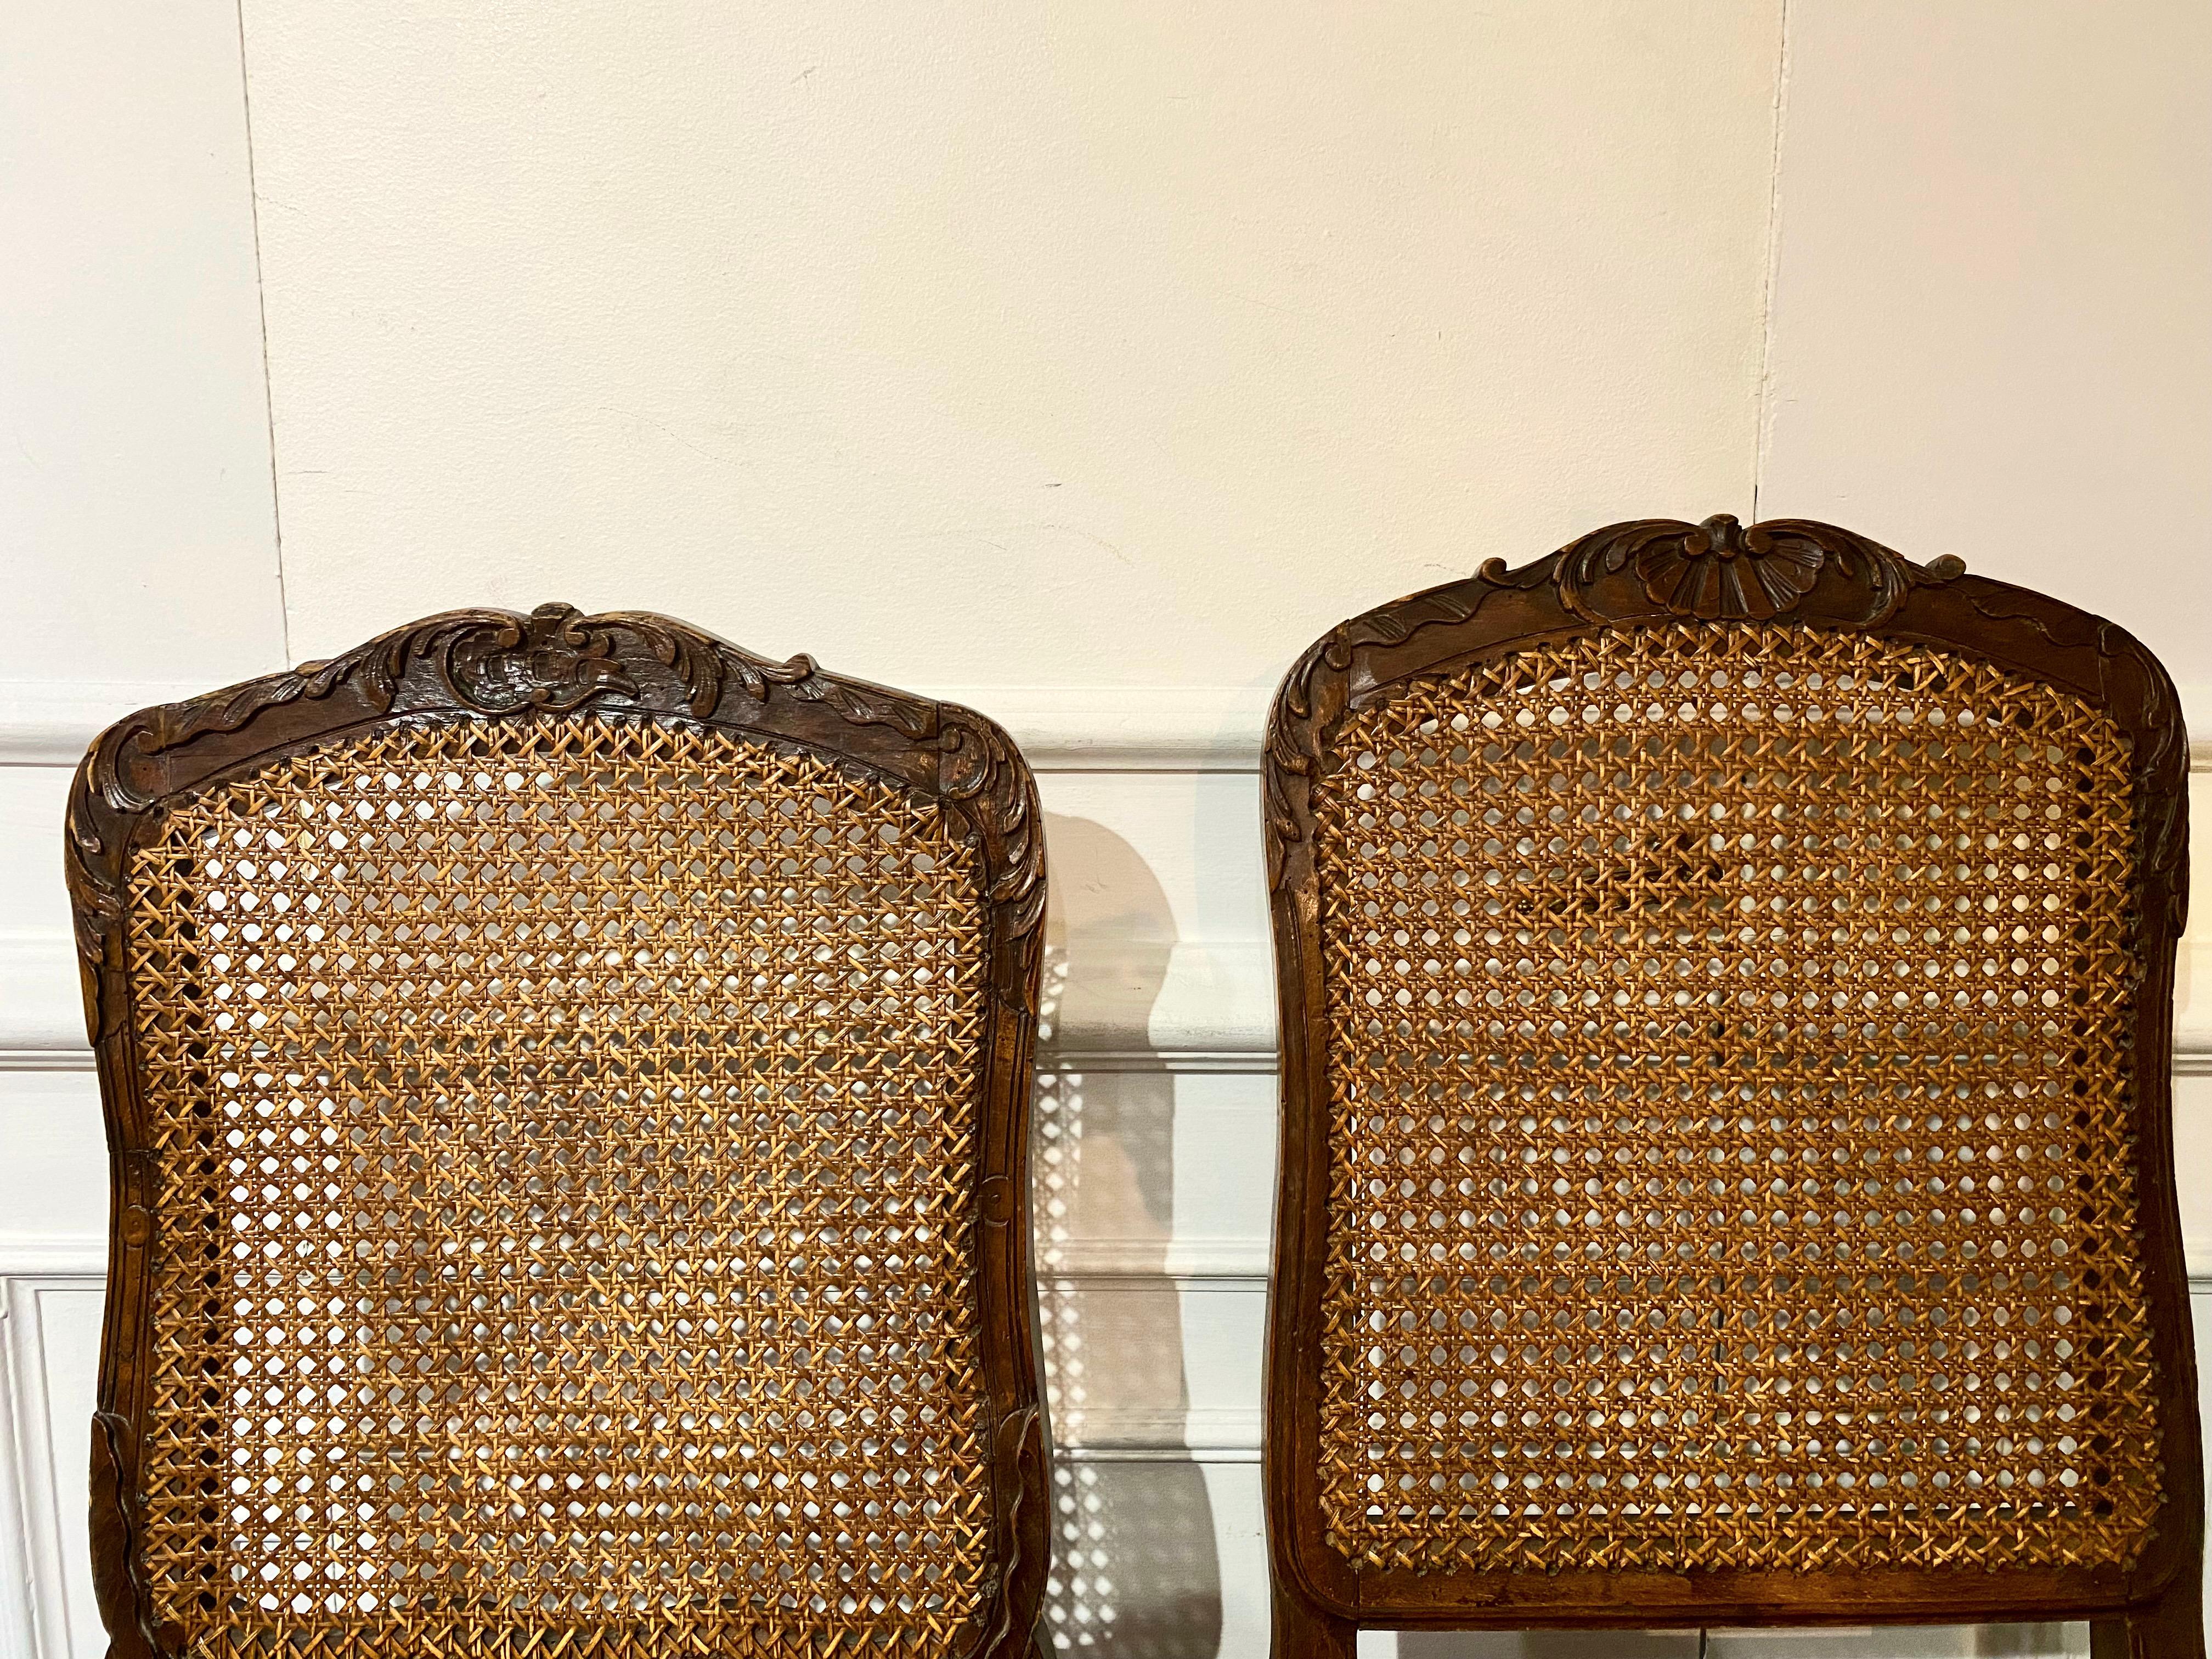 French, Louis XV Régence Caned Chairs, 18th Century, Two Similar For Sale 12